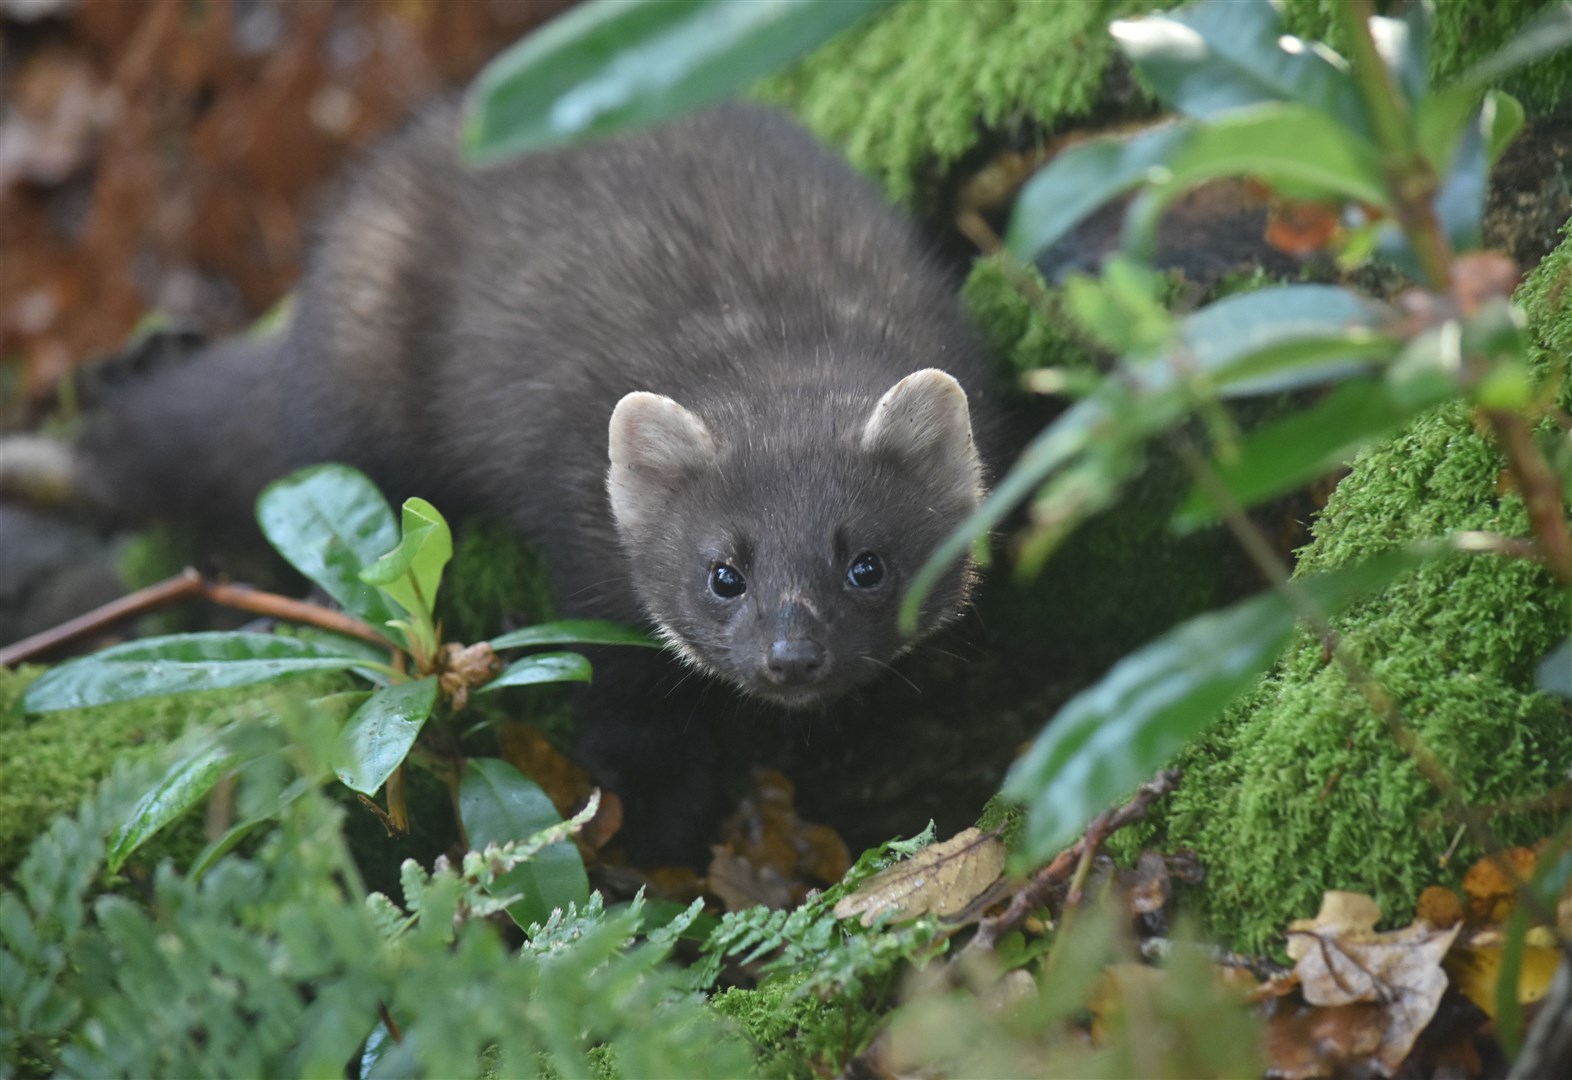 Pine martens are helping secure the survival of their traditional prey, te red squirrel.